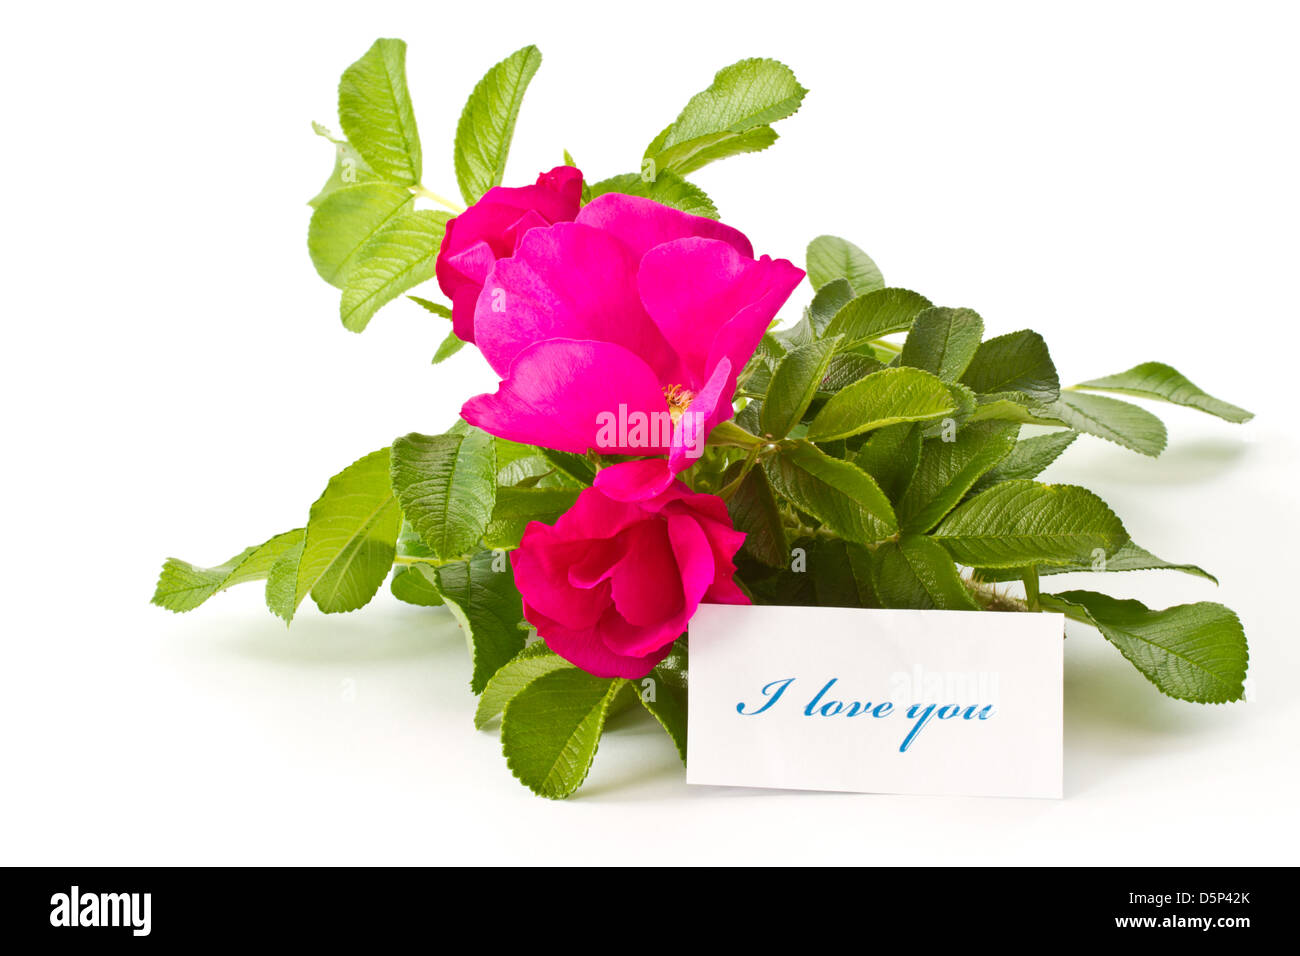 ripe fruit and beautiful flowers wild rose on a white background Stock Photo